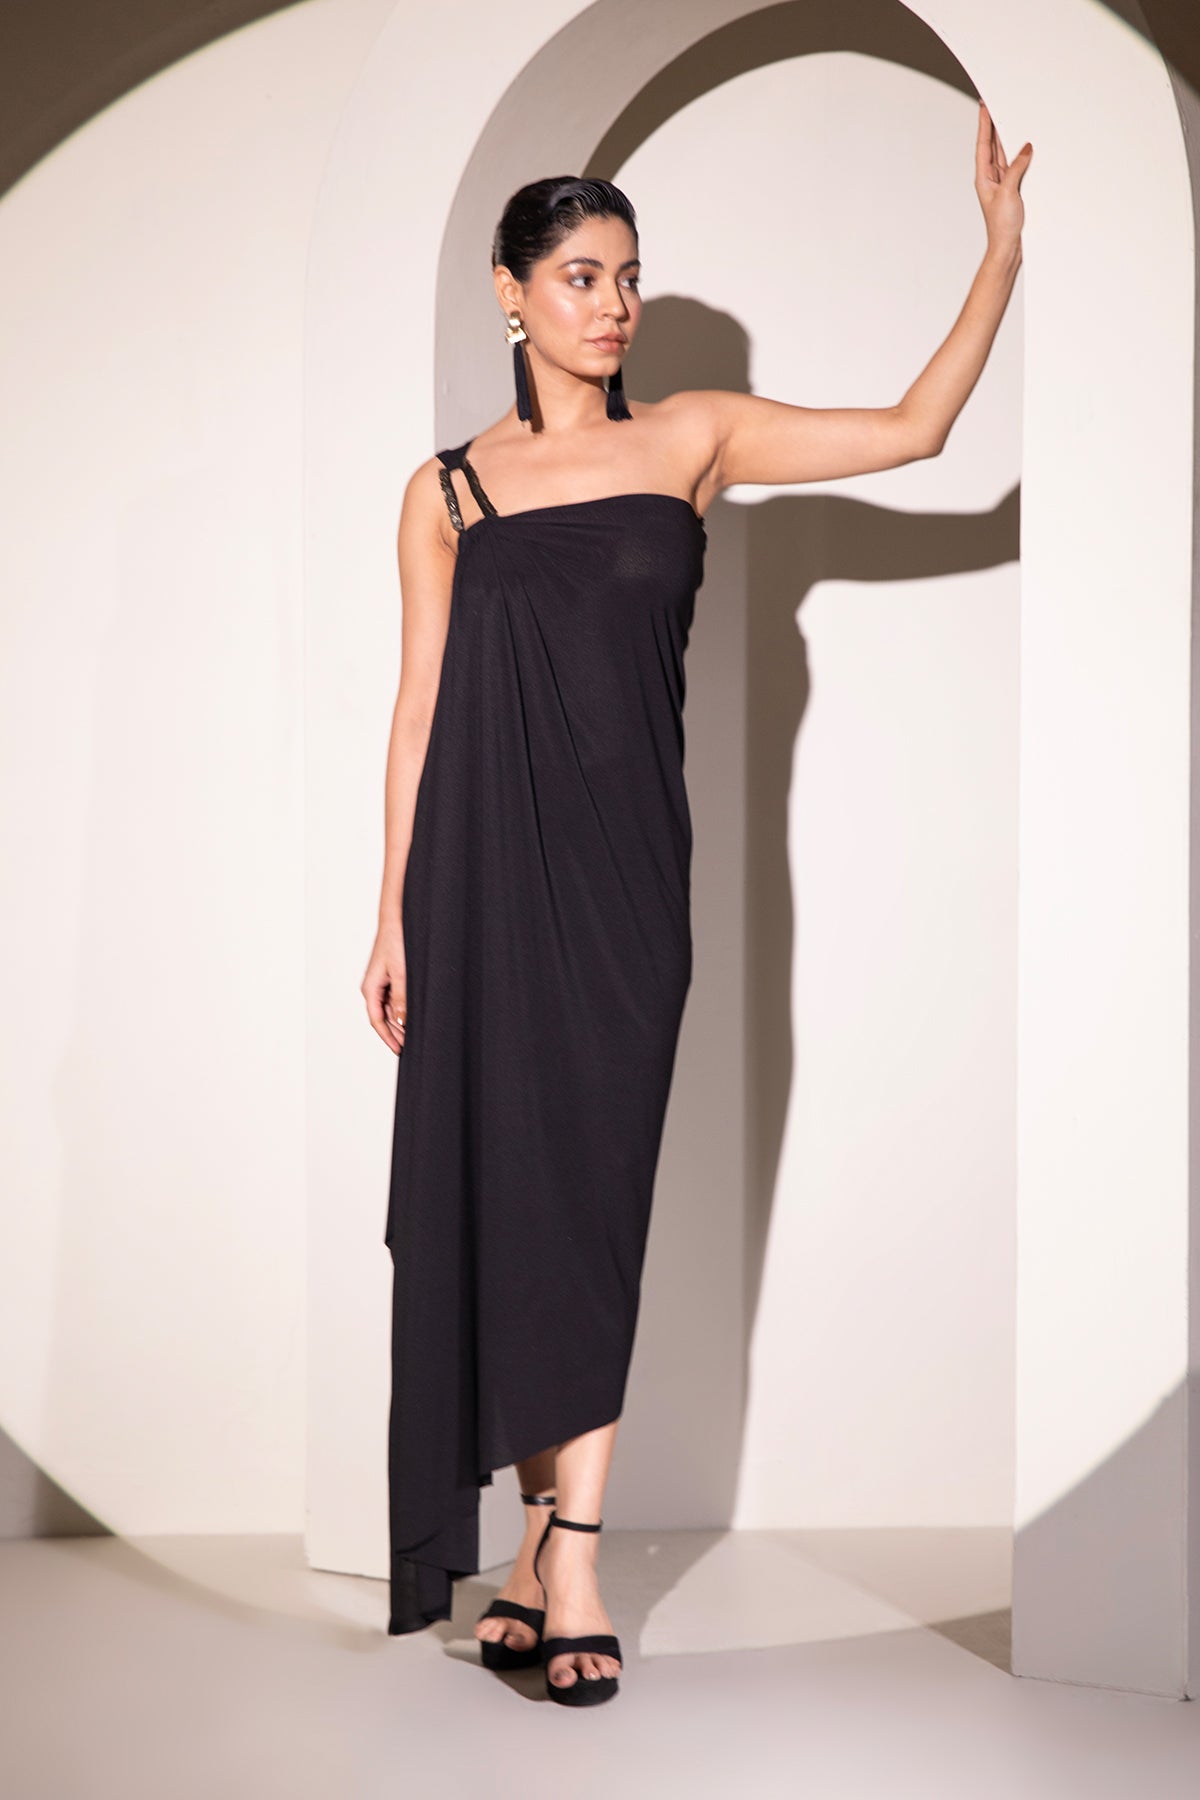 Black coined Toga dress